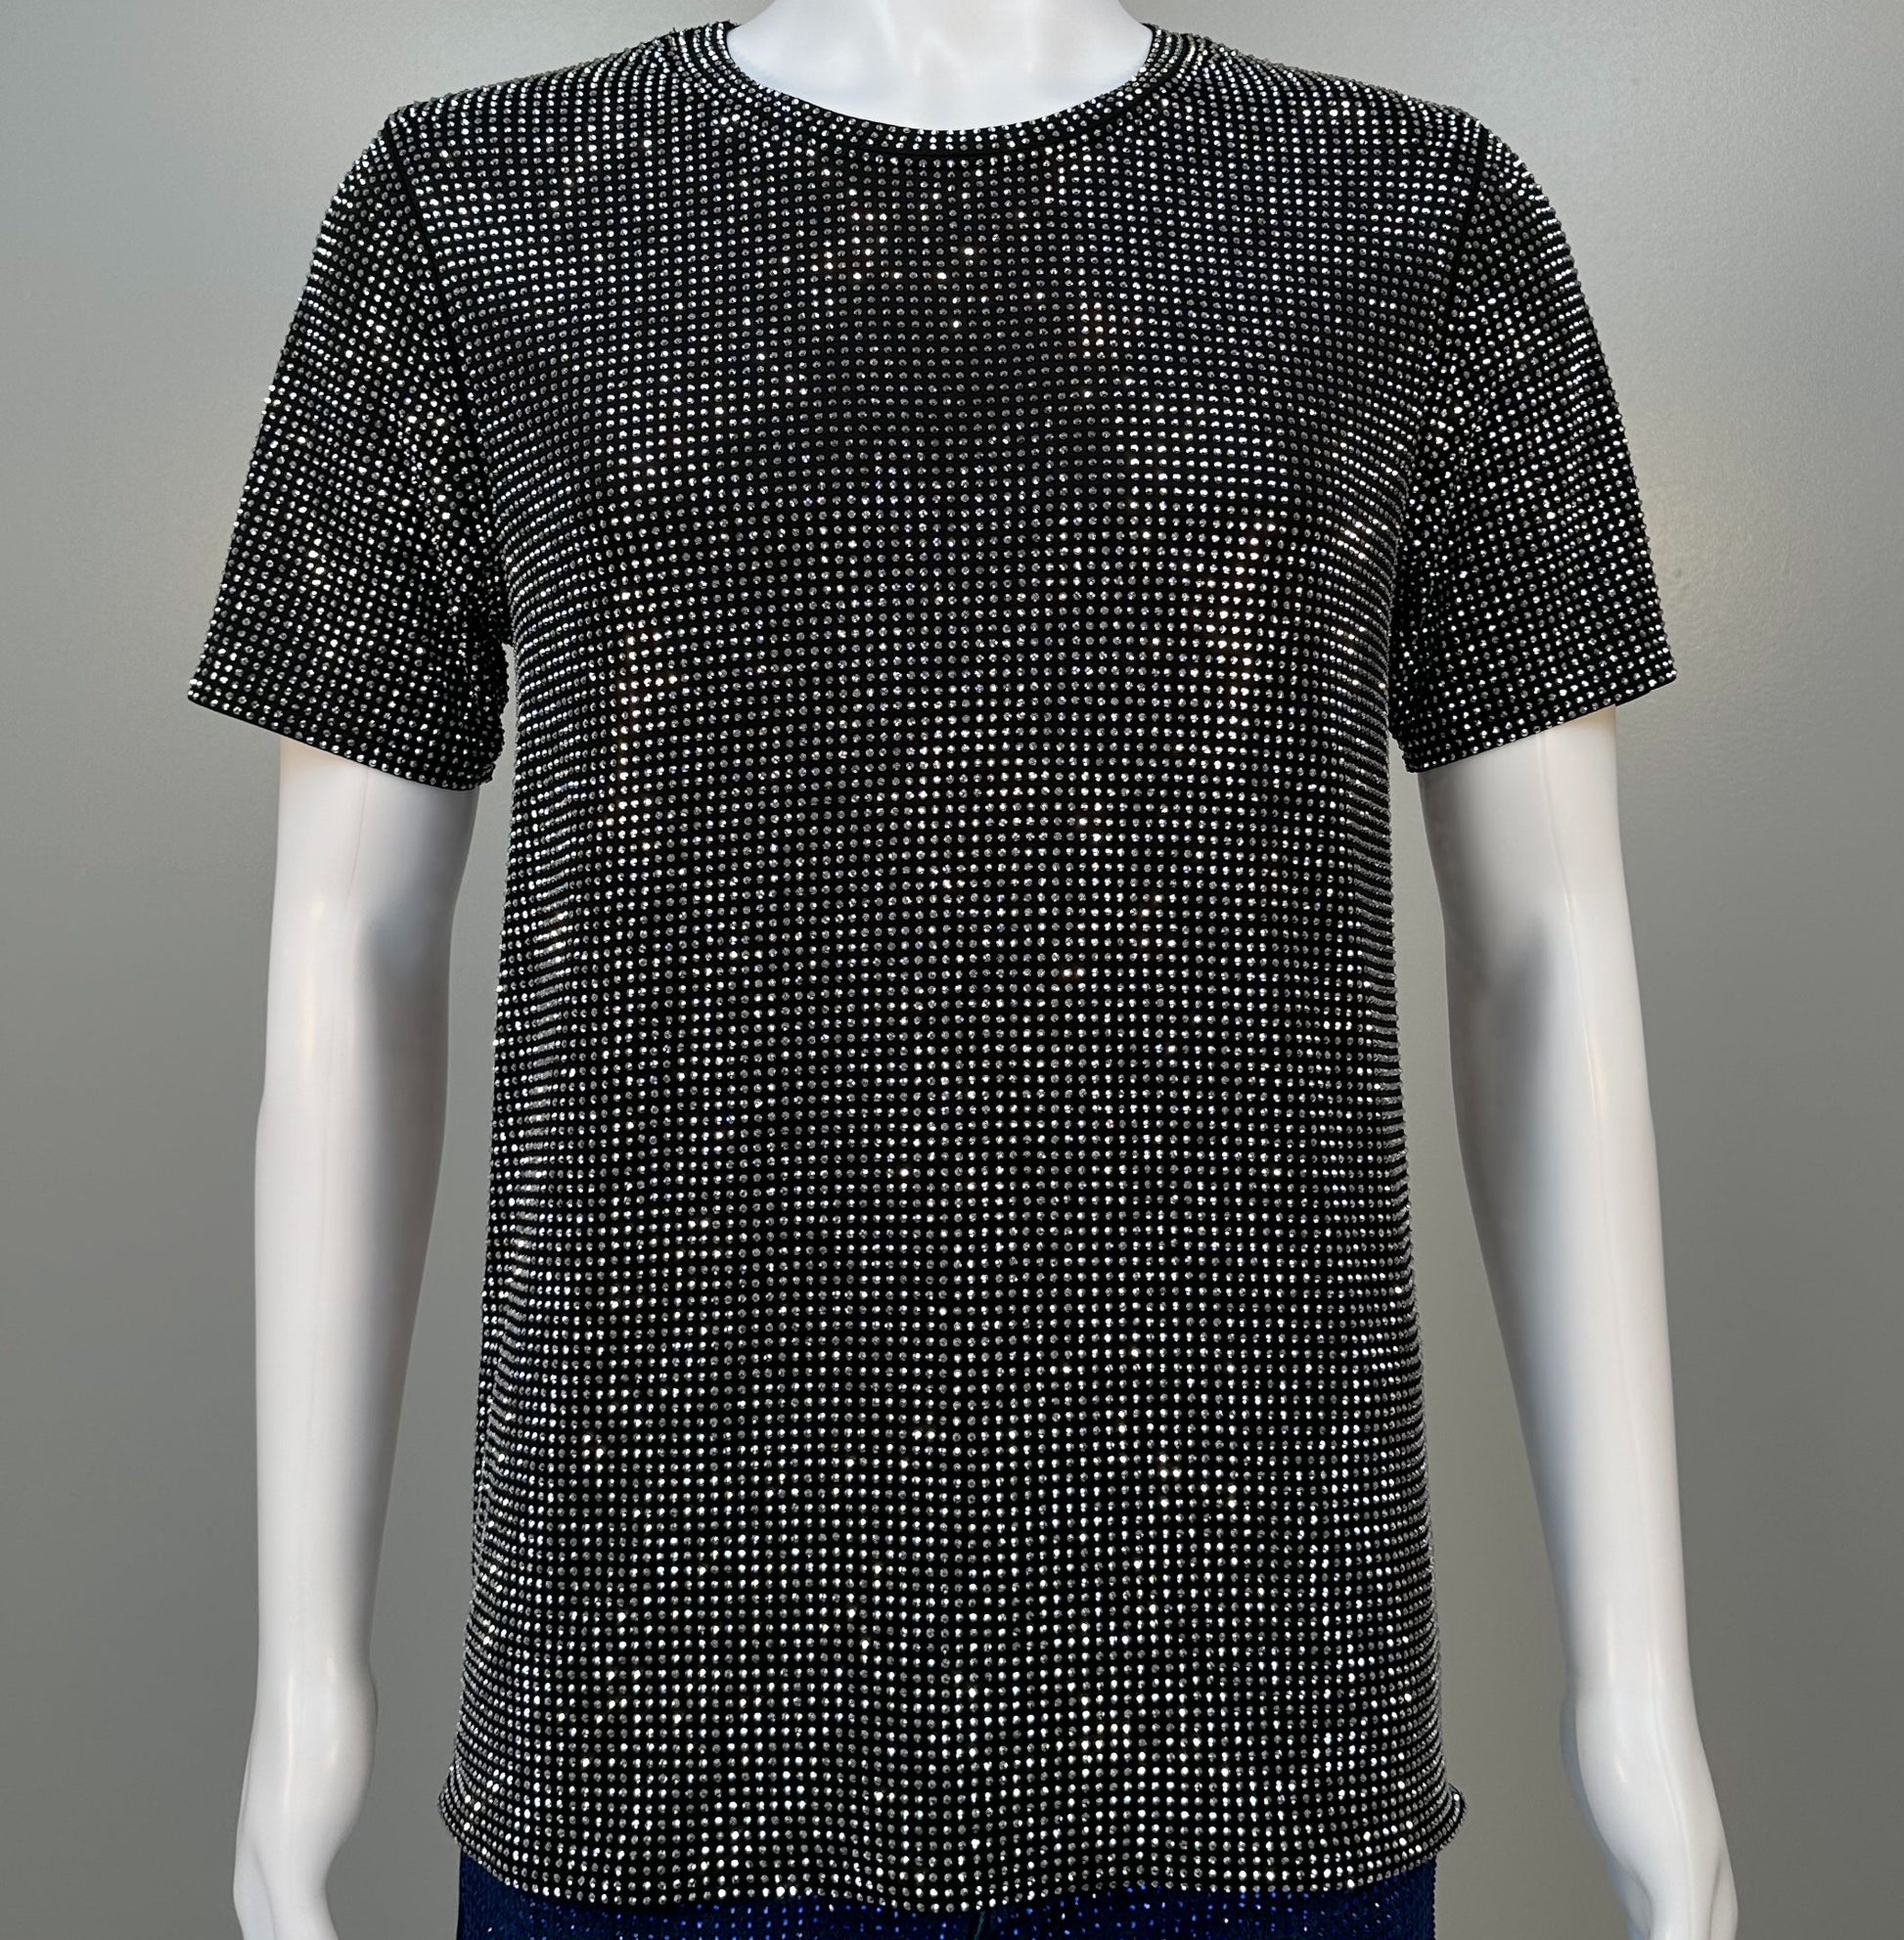 Photo of a sparkling Silver Crystals on Black Fabric T-shirt featuring thousands of crystal rhinestones.